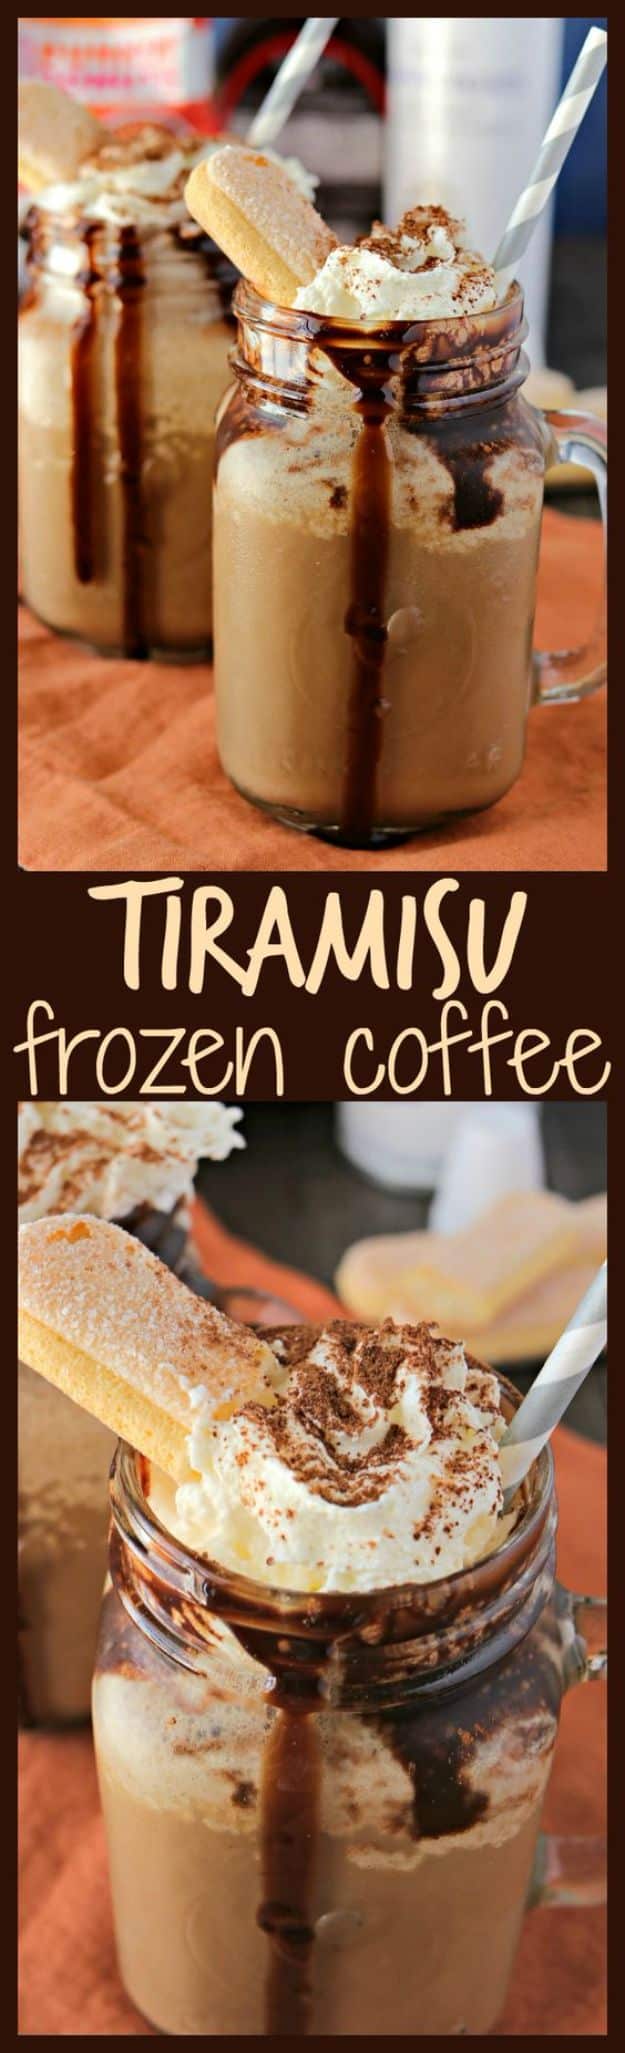 Coffee Drink Recipes - Tiramisu Frozen Coffee - Easy Drinks and Coffees To Make At Home - Frozen, Iced, Cold Brew and Hot Coffee Recipe Ideas - Sugar Free, Low Fat and Blended Drinks - Mocha, Frappucino, Caramel, Chocolate, Latte and Americano - Flavored Coffee, Liqueur and After Dinner Drinks With Alcohol, Dessert Ideas for Parties #coffeedrinks #coffeerecipes #coffee #drinkrecipes